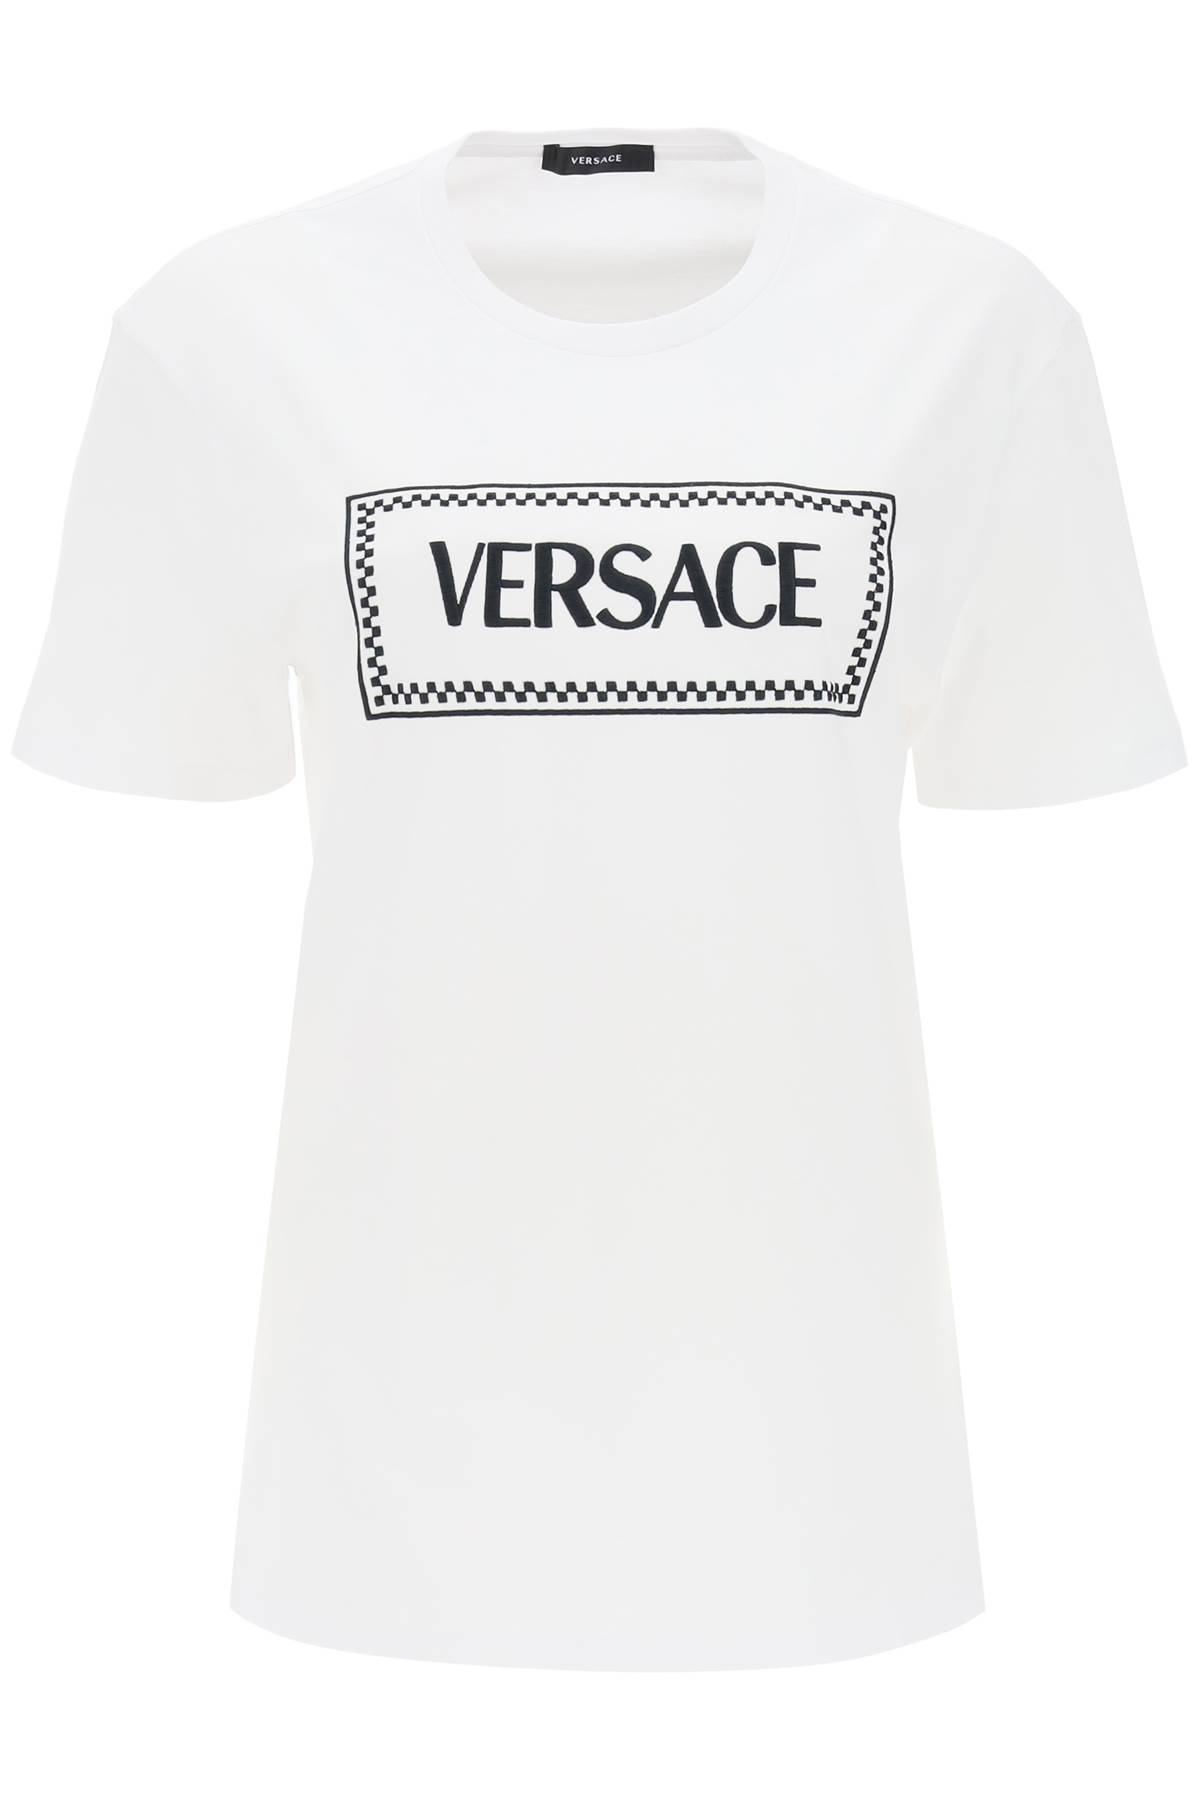 Versace VERSACE t-shirt with logo embroidery